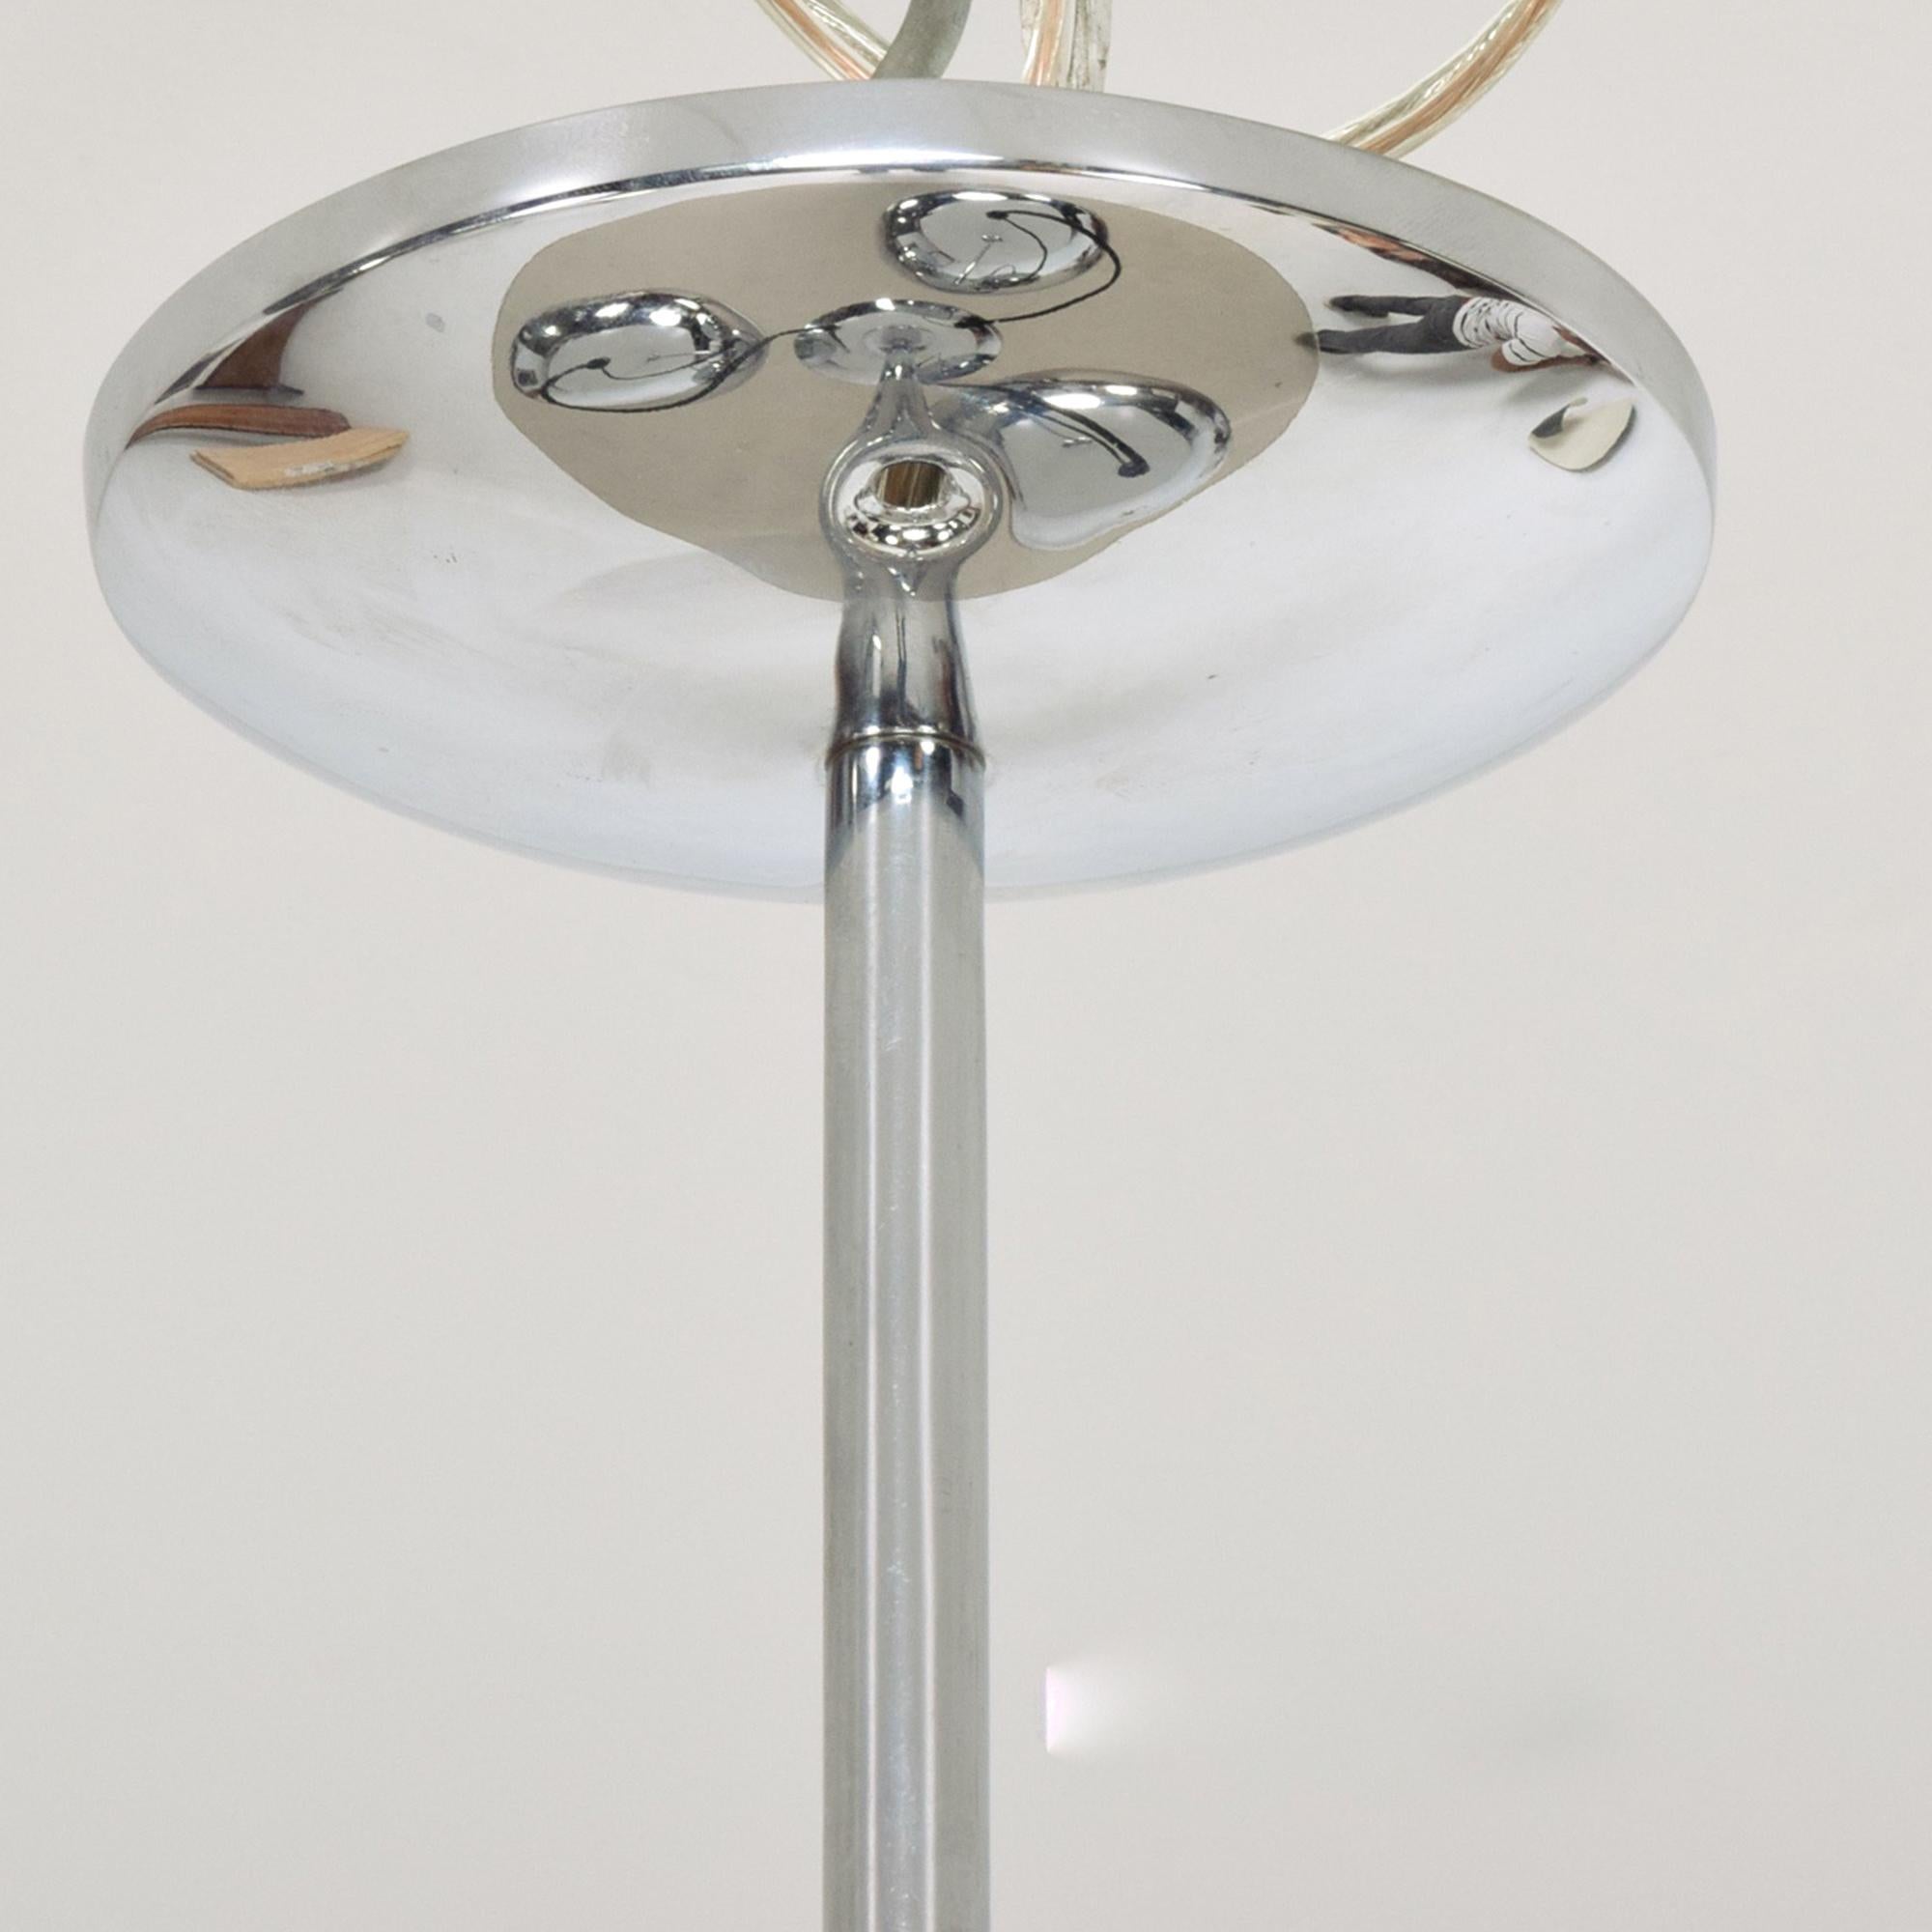 AMBIANIC presents
1960s Lightolier Directional 3 Light Globe Pendant Lamp Chrome & Lucite
Constructed with three adjustable chrome-plated lights allowing for light direction.
Mounted on Smoke Lucite shade.
27 tall x 23.75 in diameter
Unmarked.